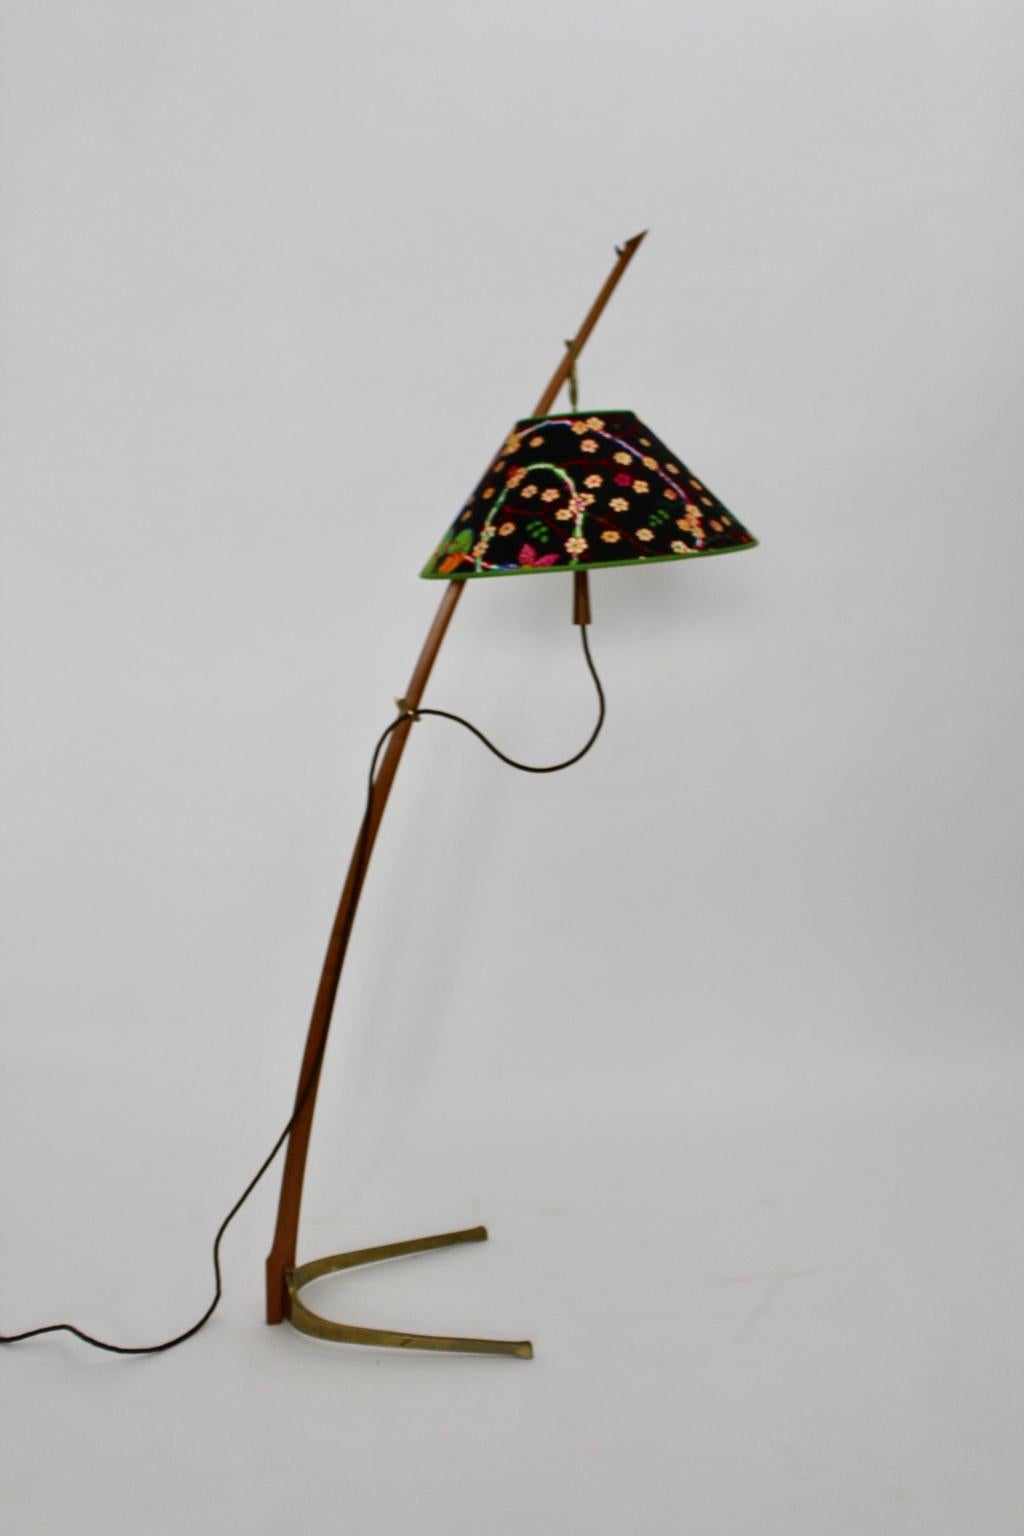 Mid Century Modern vintage floor lamp Dornstab or Thorn Stick from walnut and brass by J. T. Kalmar circa 1952, Vienna.
This beautiful and well known iconic Viennese floor lamp features the model number 2076.
The significant attributes from the